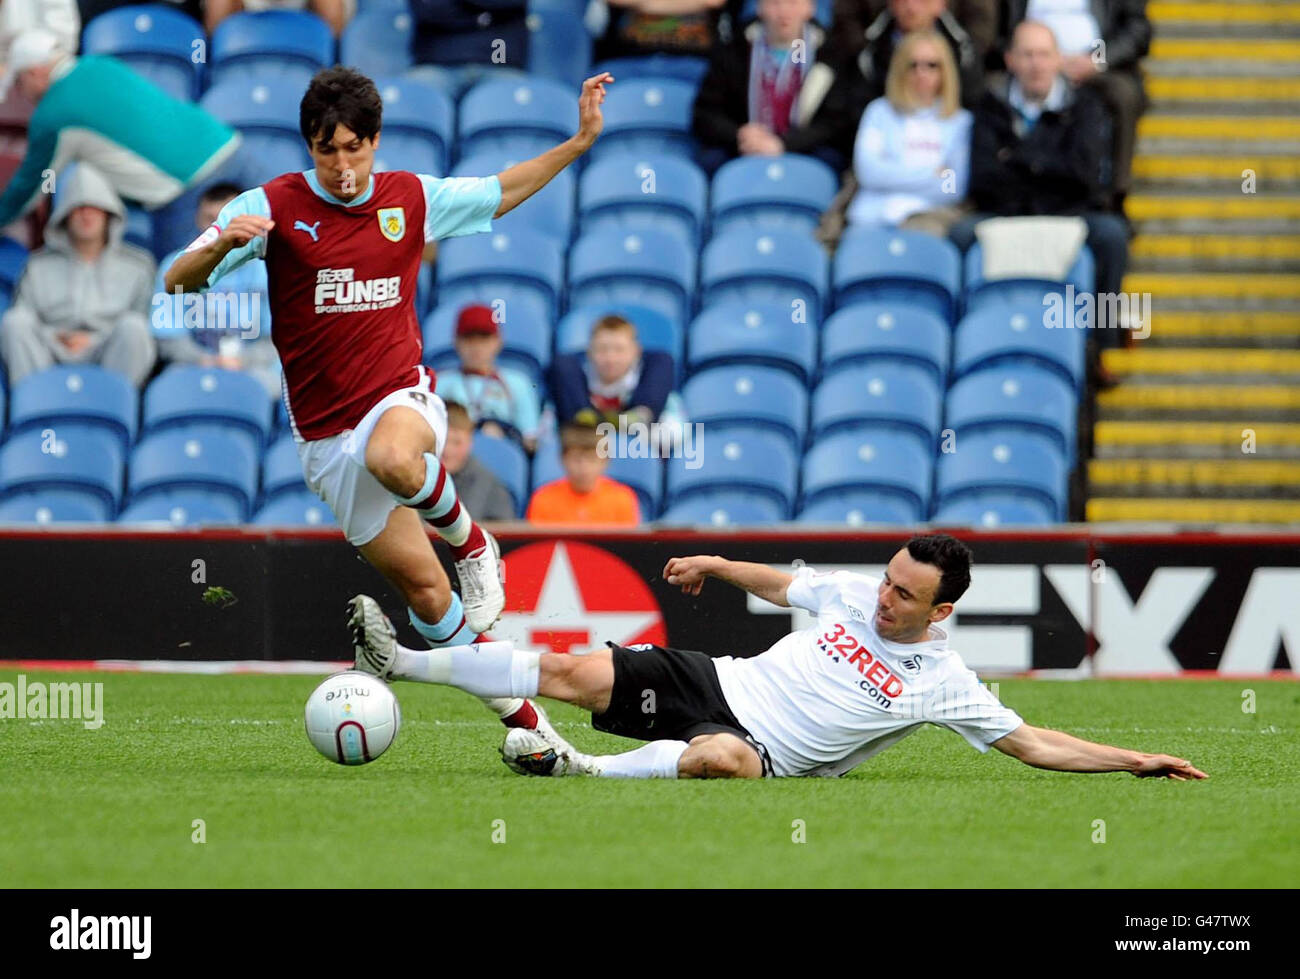 Burnley's Jack Cork (left) battles for the ball with Swansea's Leon Britton during the npower Football League Championship match at Turf Moor, Burnley. Stock Photo